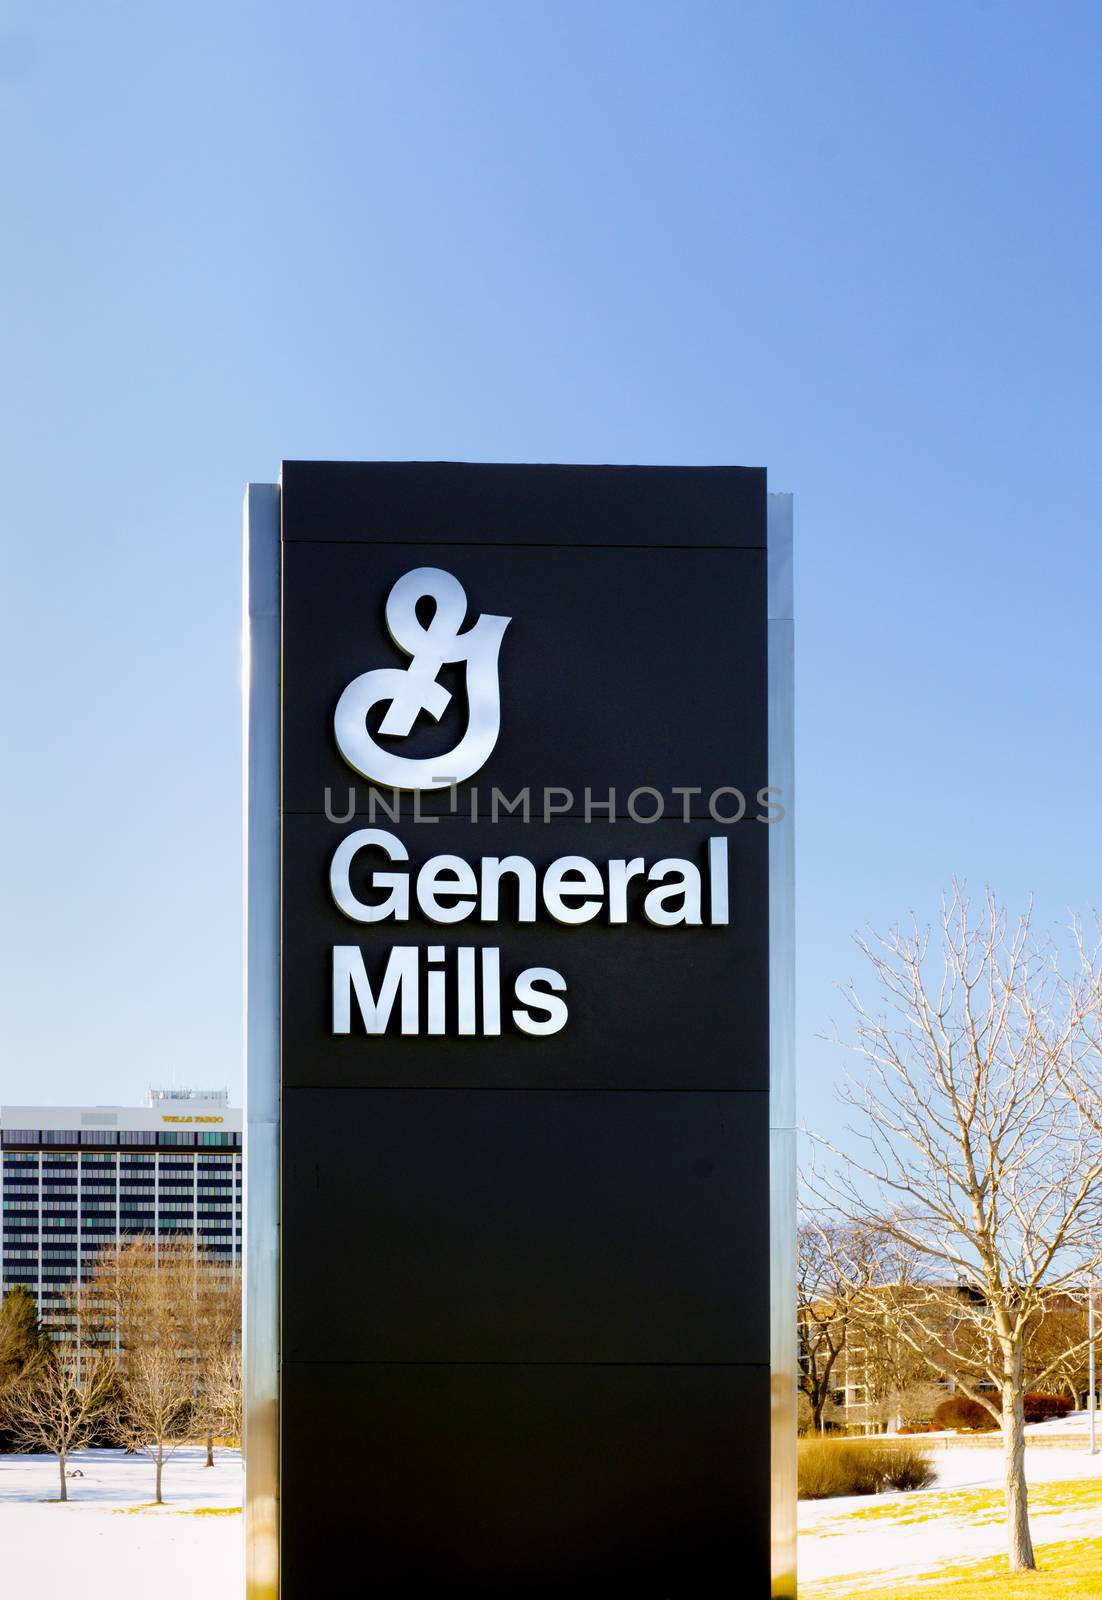 GOLDEN VALLEY, MN/USA - JANUARY 18, 2015: General Mills corporate headquarters and sign. General Mills, Inc. is an American multinational Fortune 500 corporation food products conglomerate.